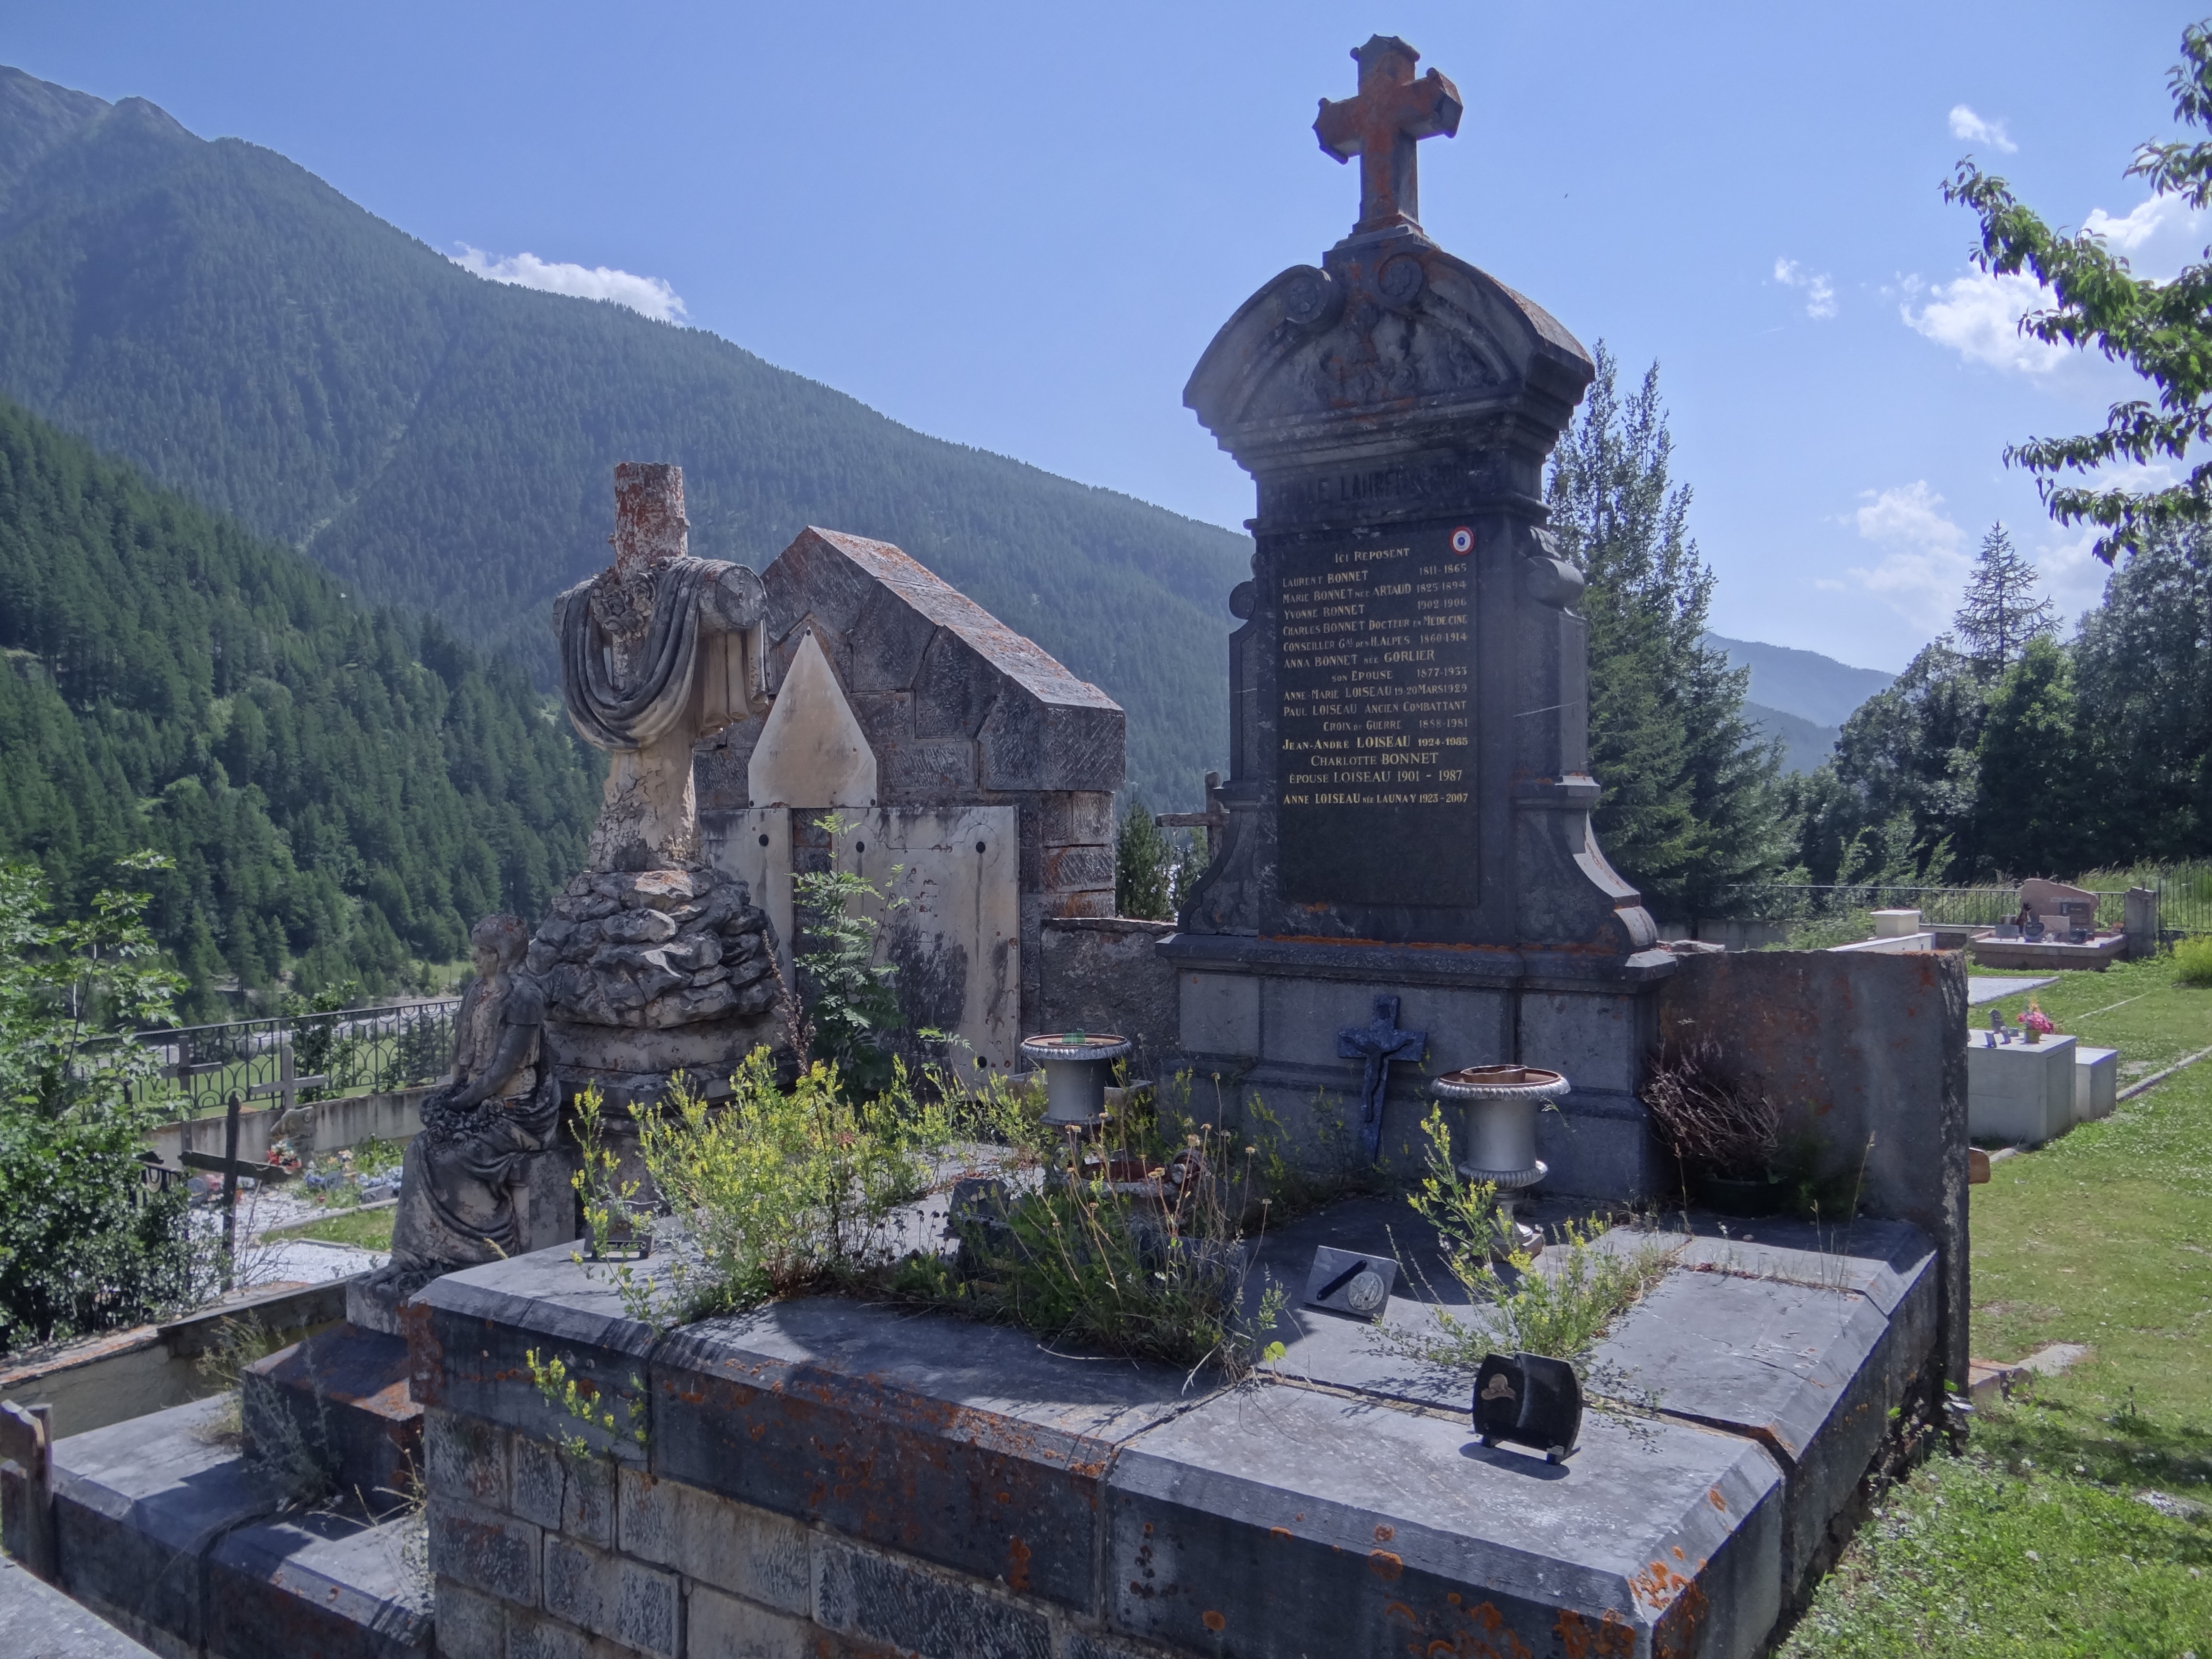 Guided tour: The Americans and their graves